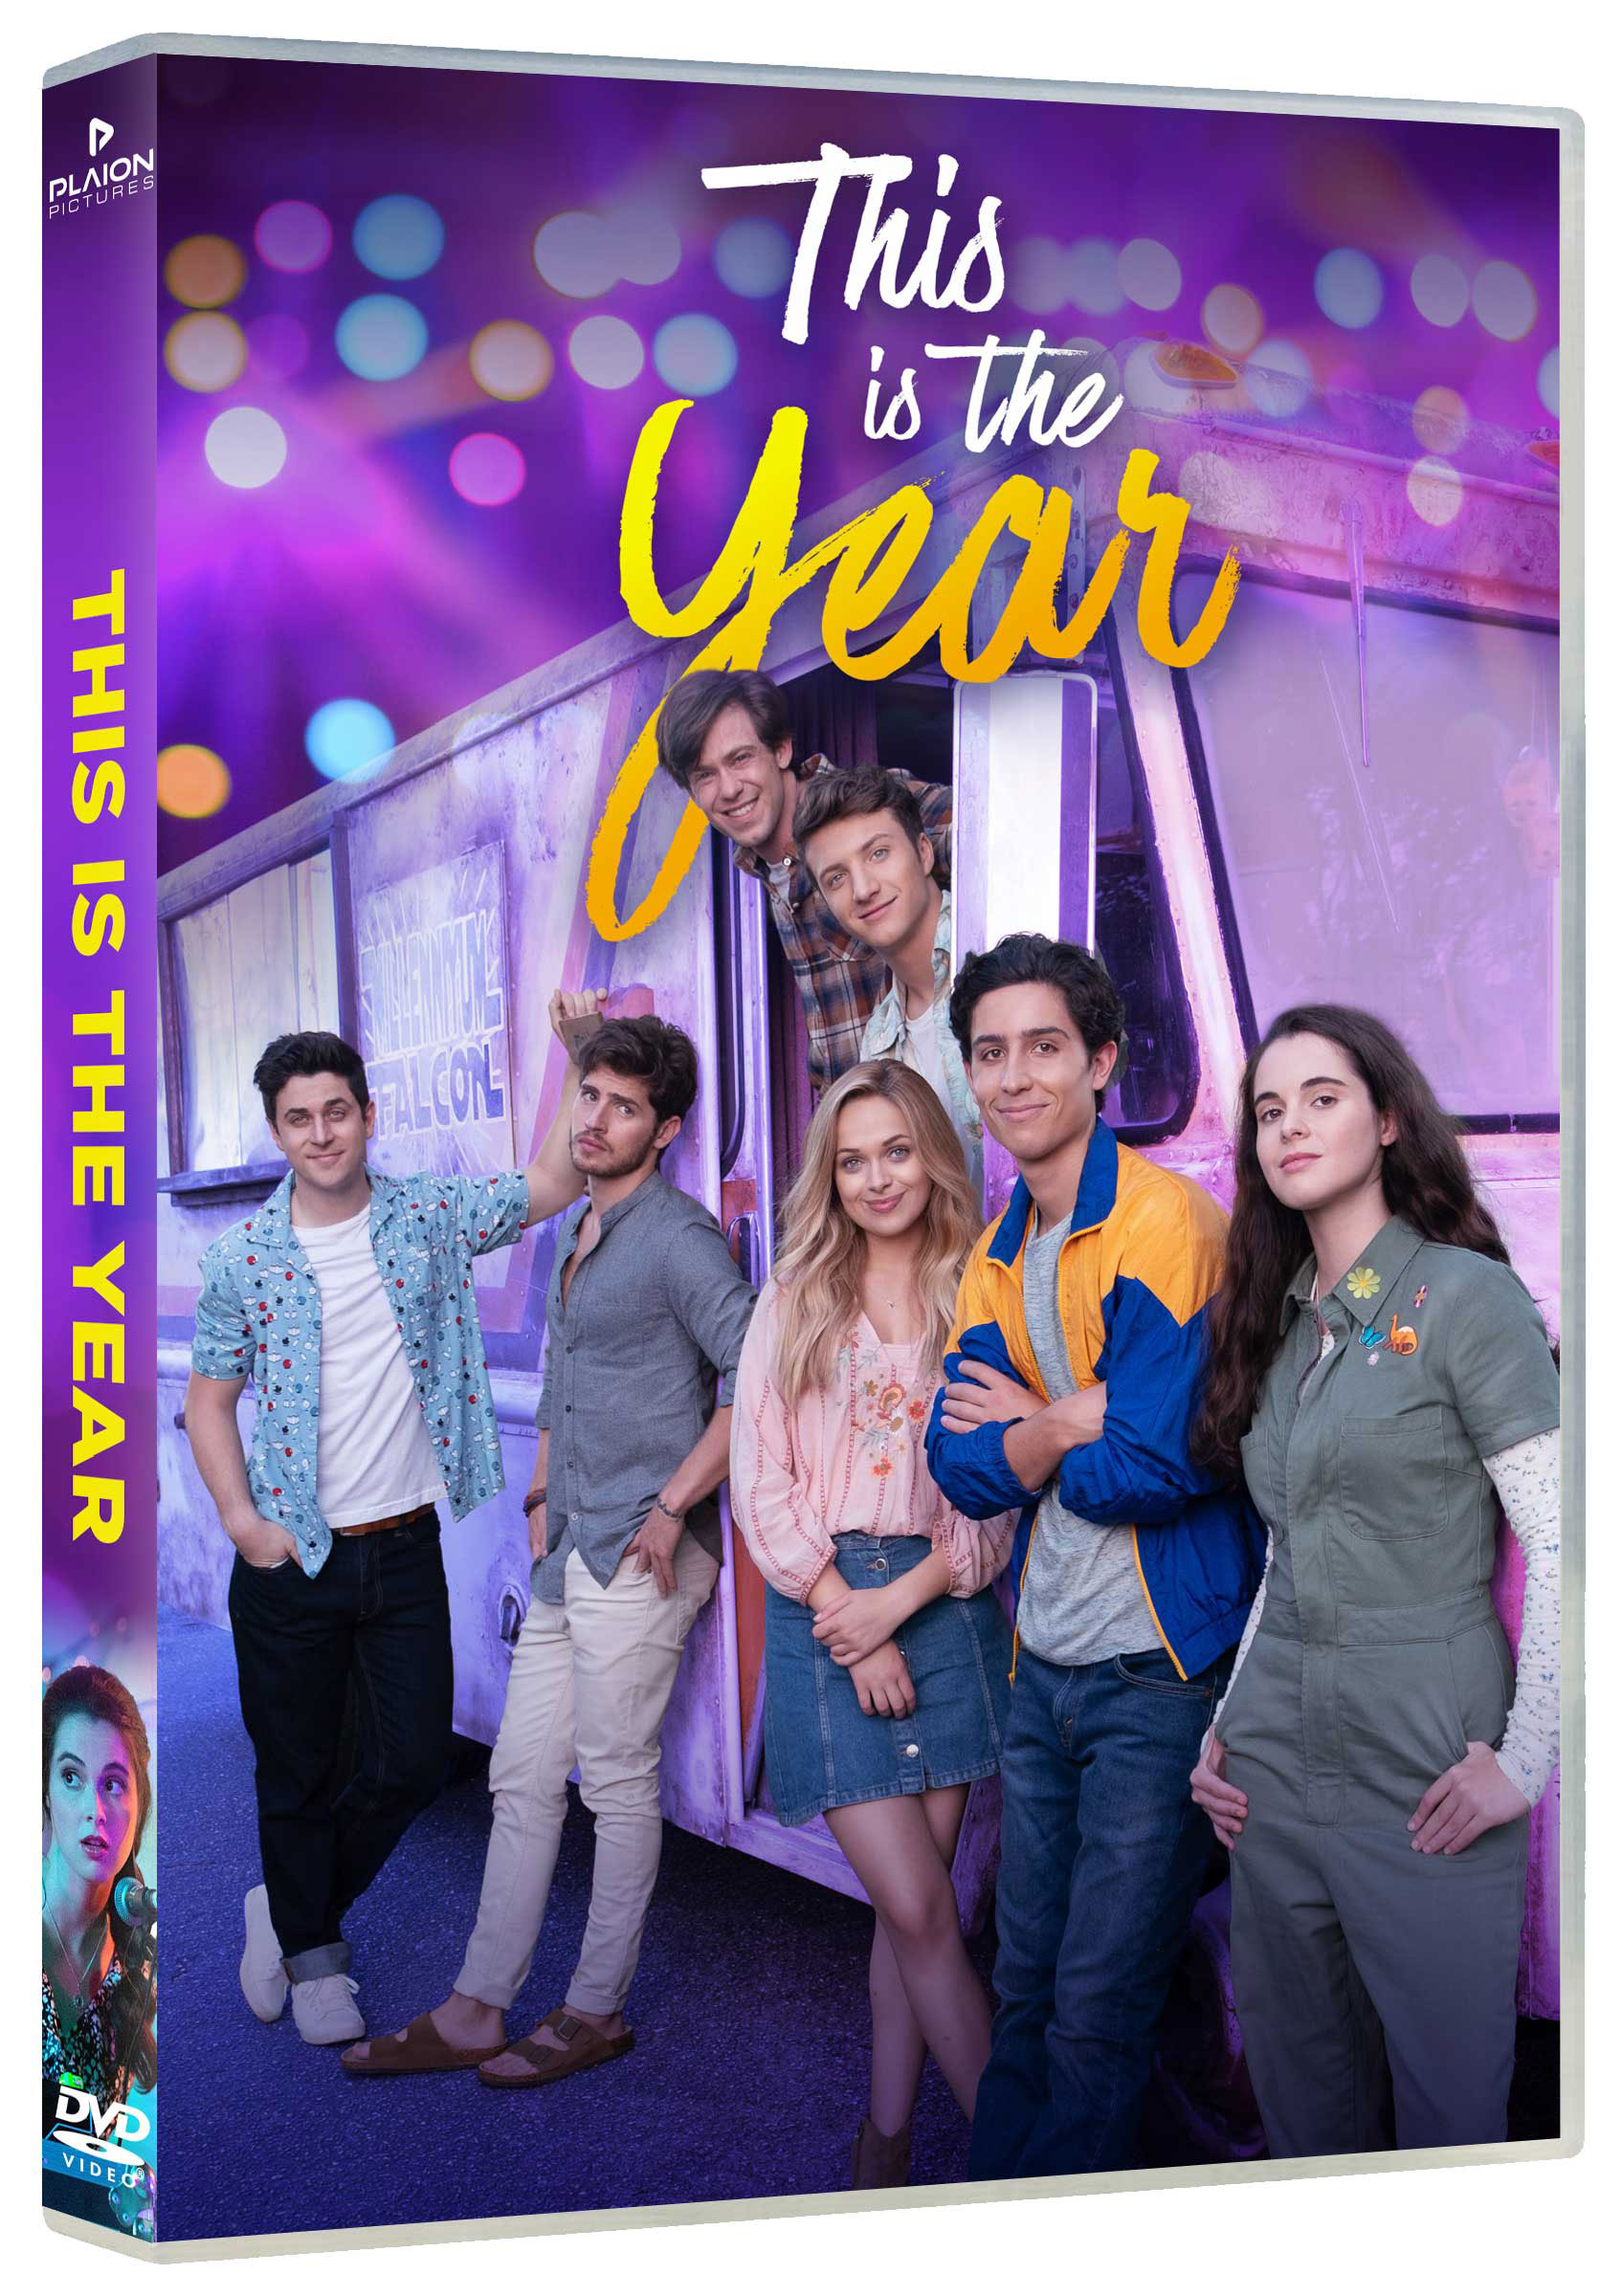 This is the year in DVD